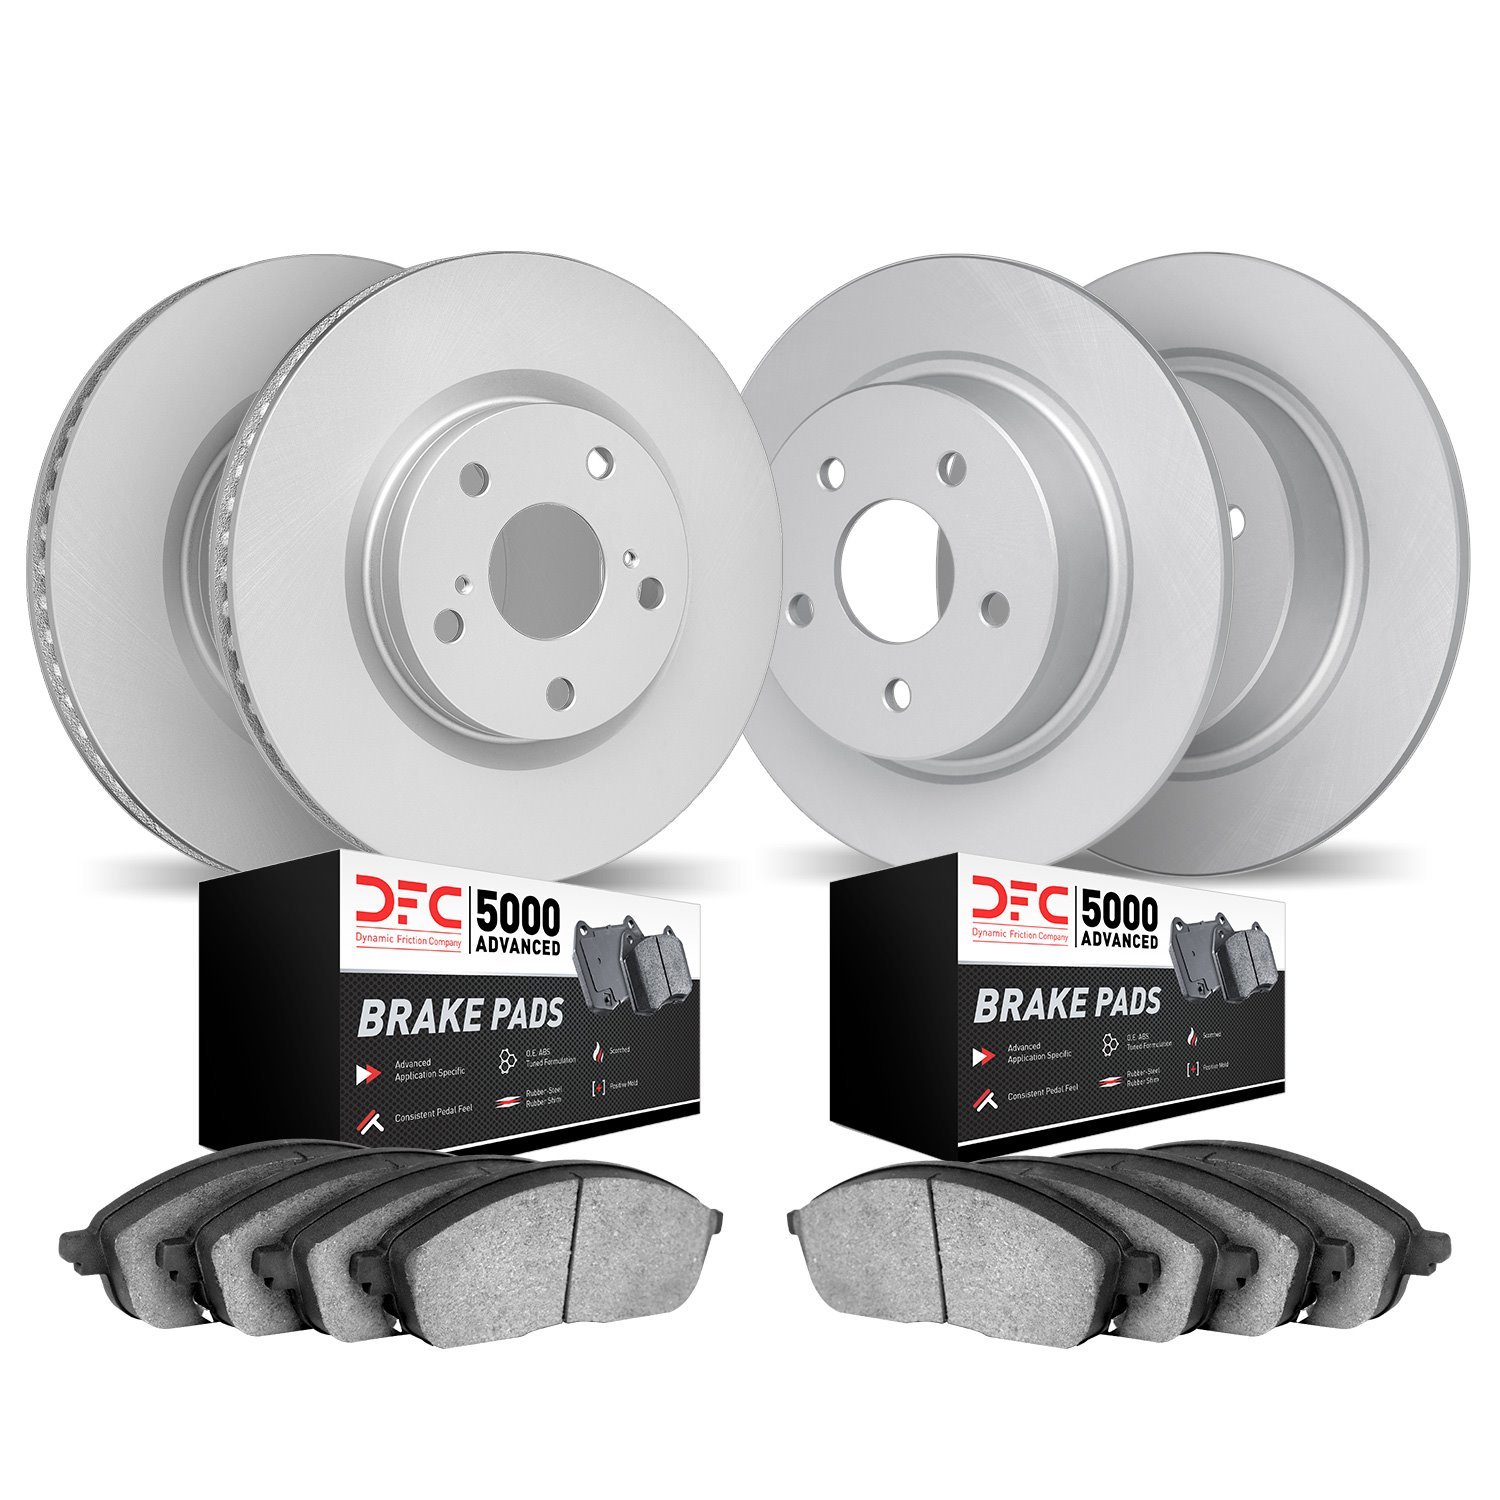 4504-63088 Geospec Brake Rotors w/5000 Advanced Brake Pads Kit, 2014-2019 Mercedes-Benz, Position: Front and Rear